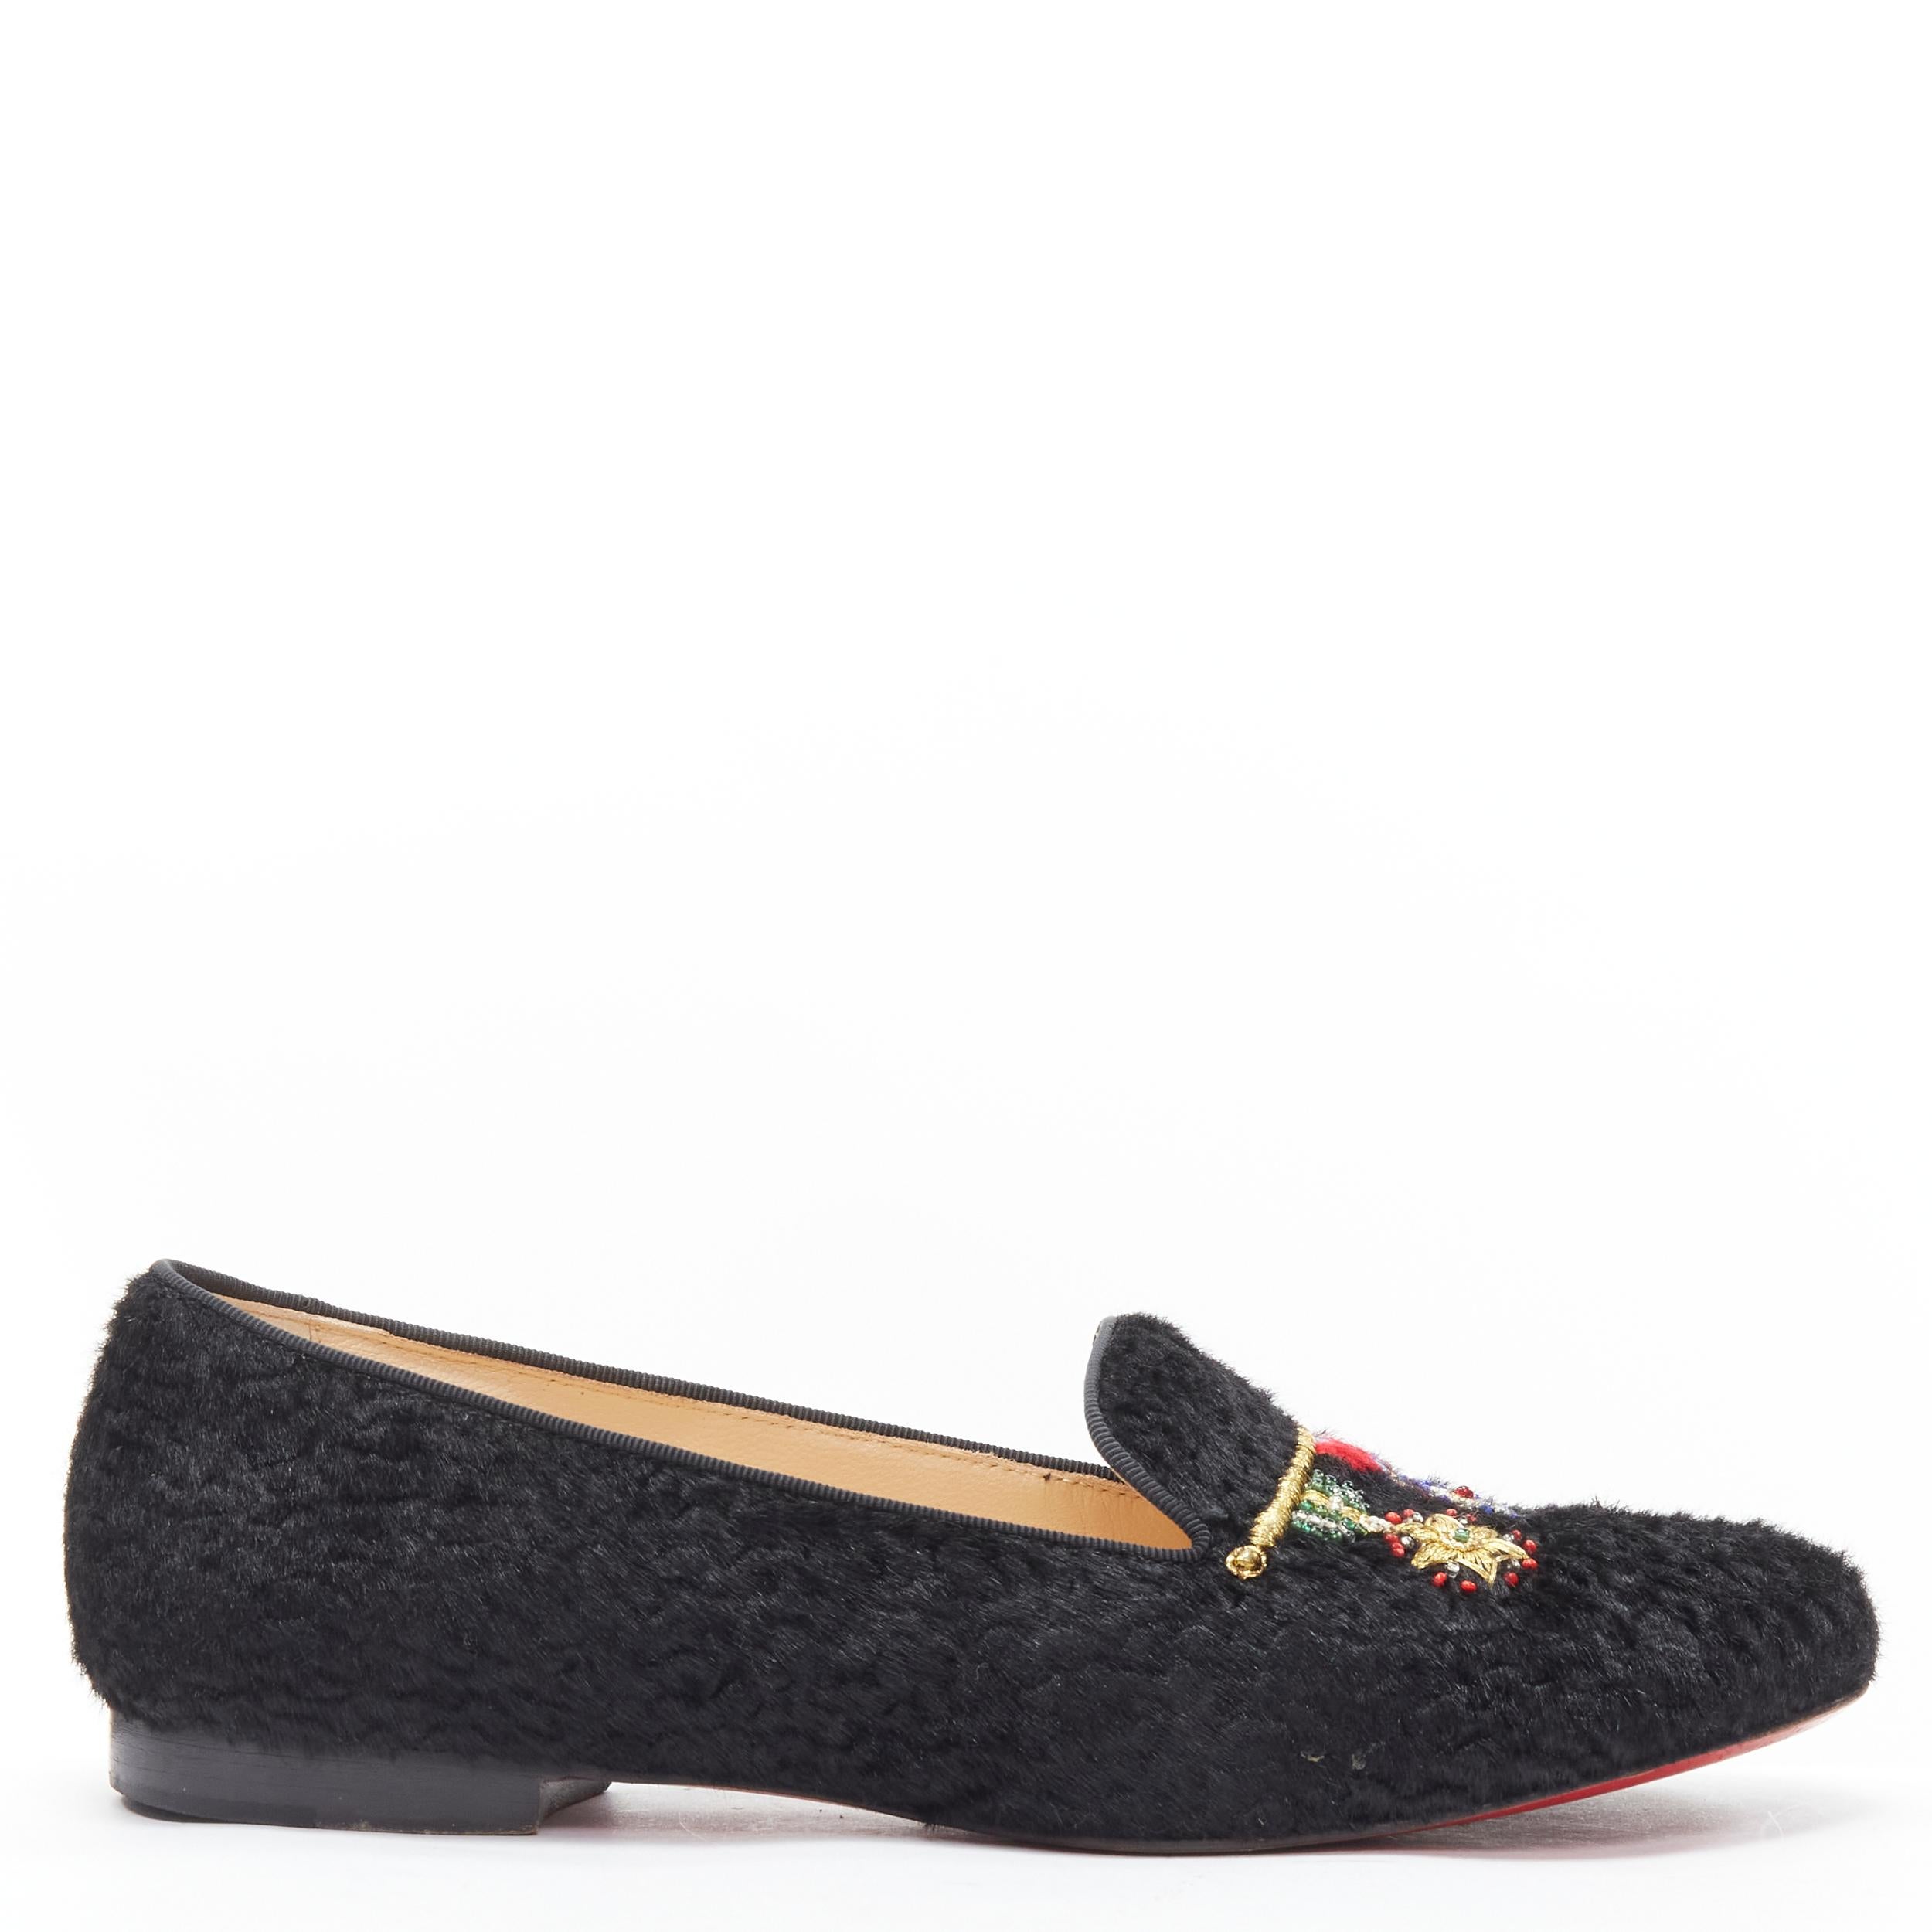 CHRISTIAN LOUBOUTIN Dictatrice Flat Pony Astrakan black embroidered loafer EU37 Reference: MELK/A00191 
Brand: Christian Louboutin 
Model: Dictatrice Flat Pony Astrakan 
Material: Pony 
Color: Black 
Pattern: Solid 
Extra Detail: Bead embroidery